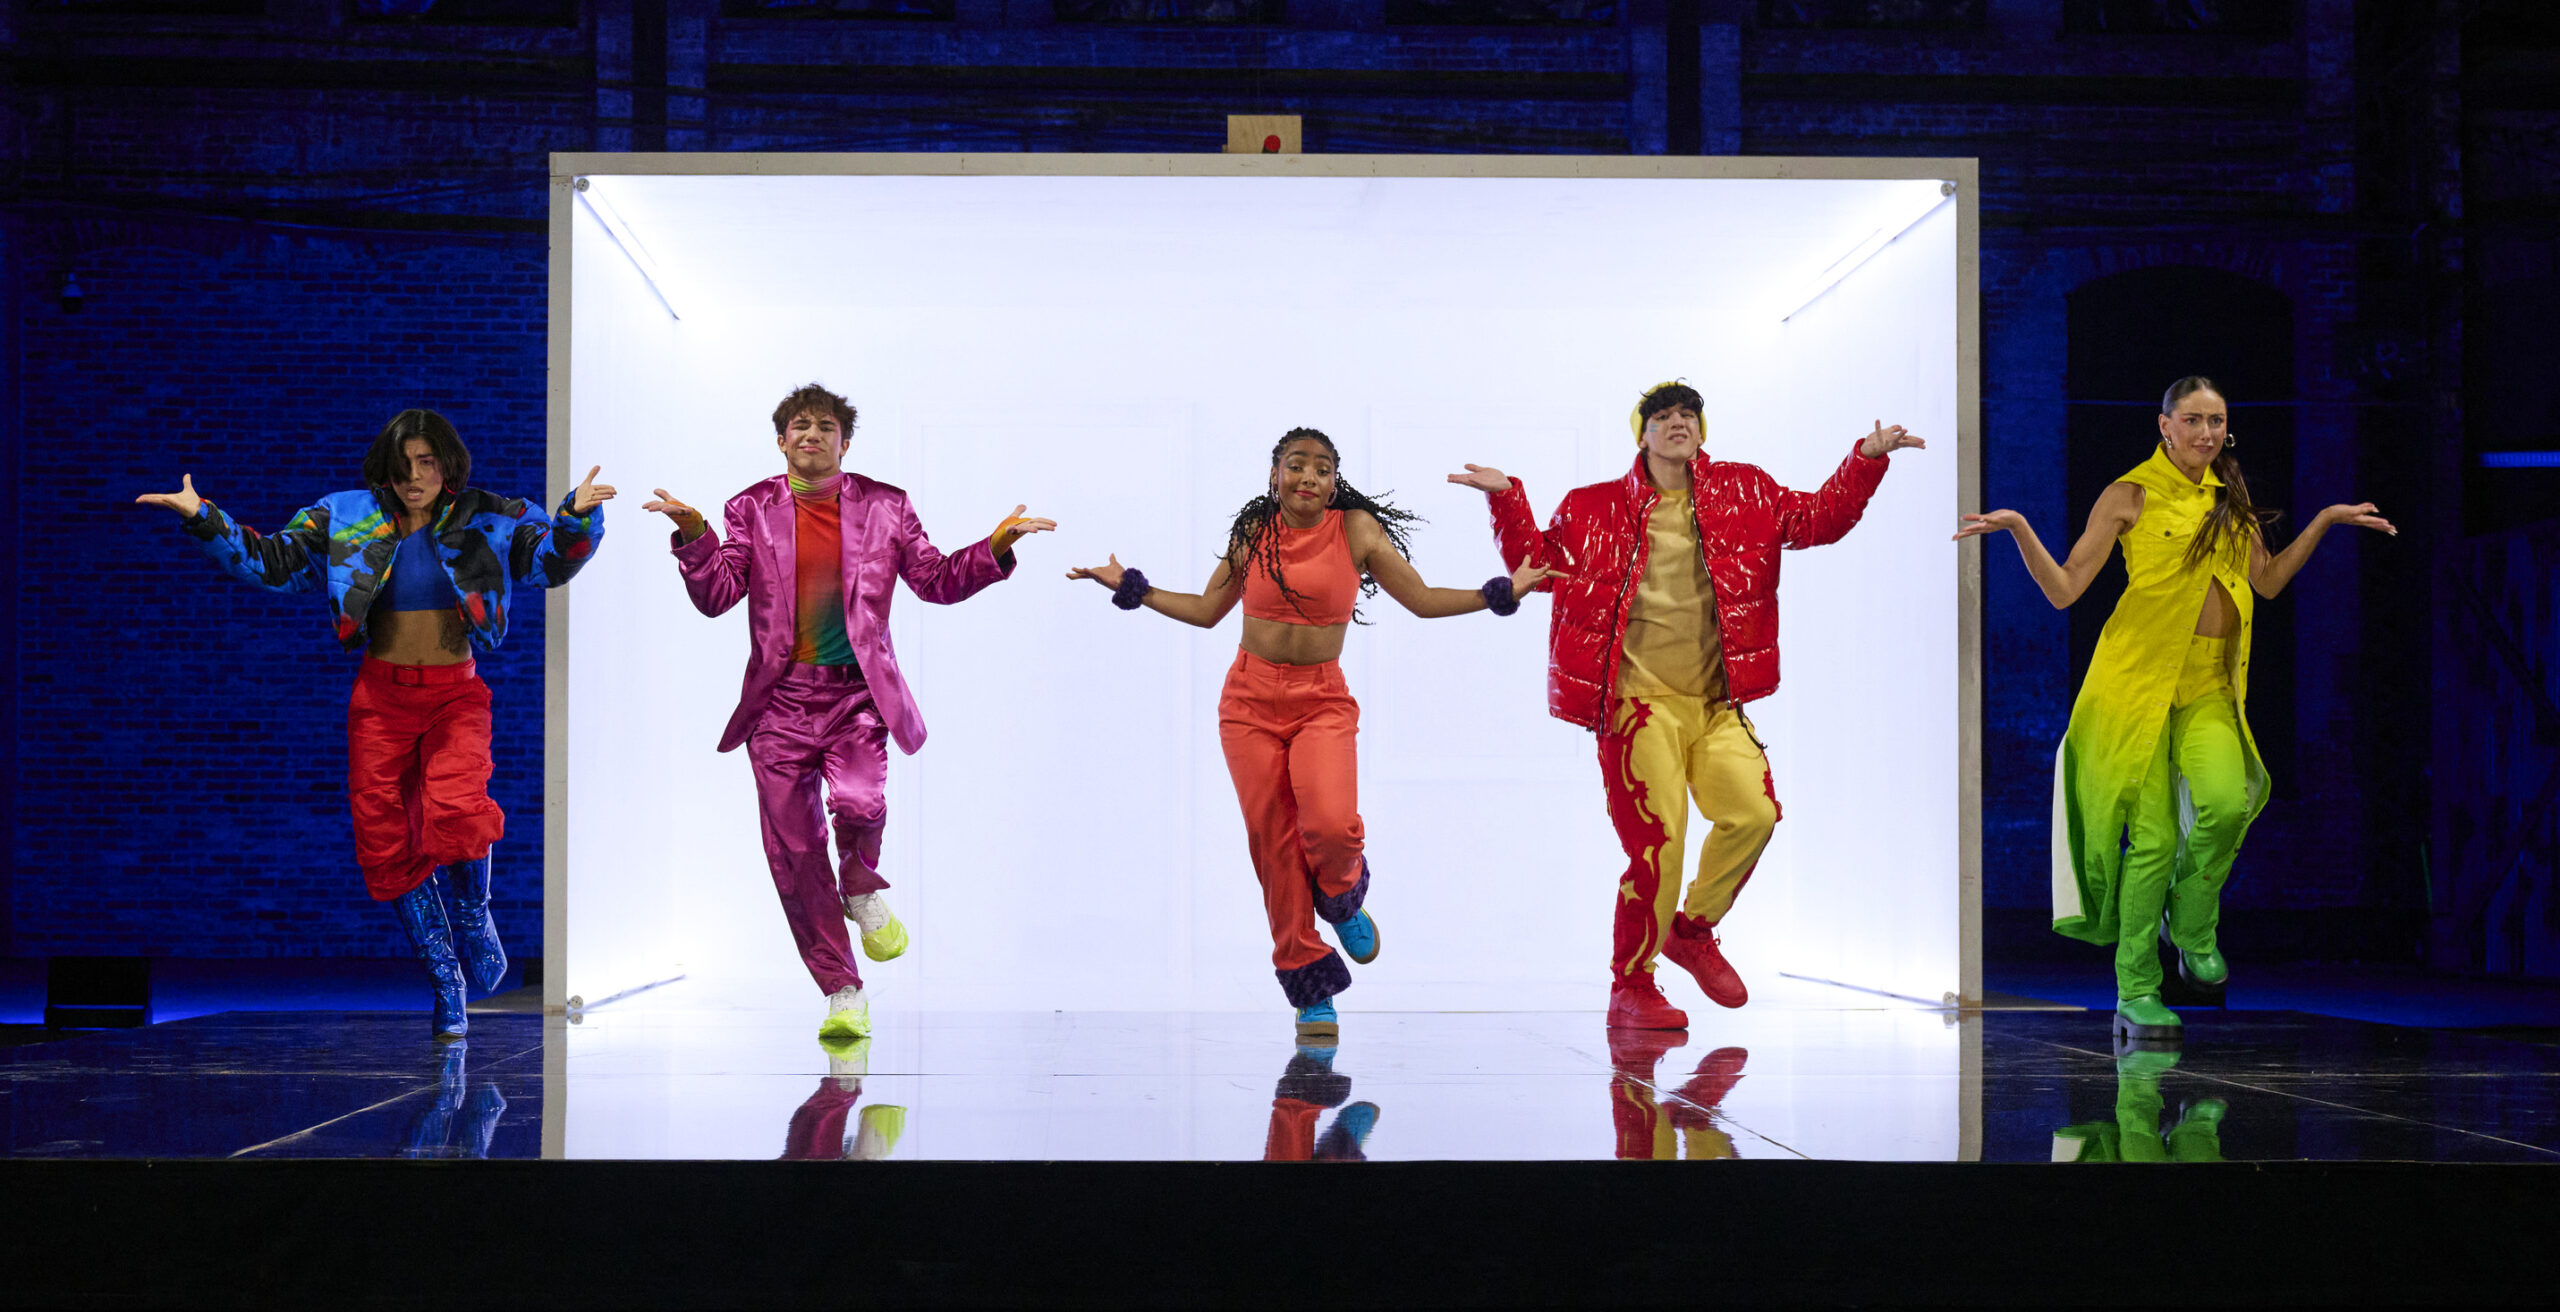 Competitors on “So You Think You Can Dance” perform in a music video to “Juice” by Lizzo.